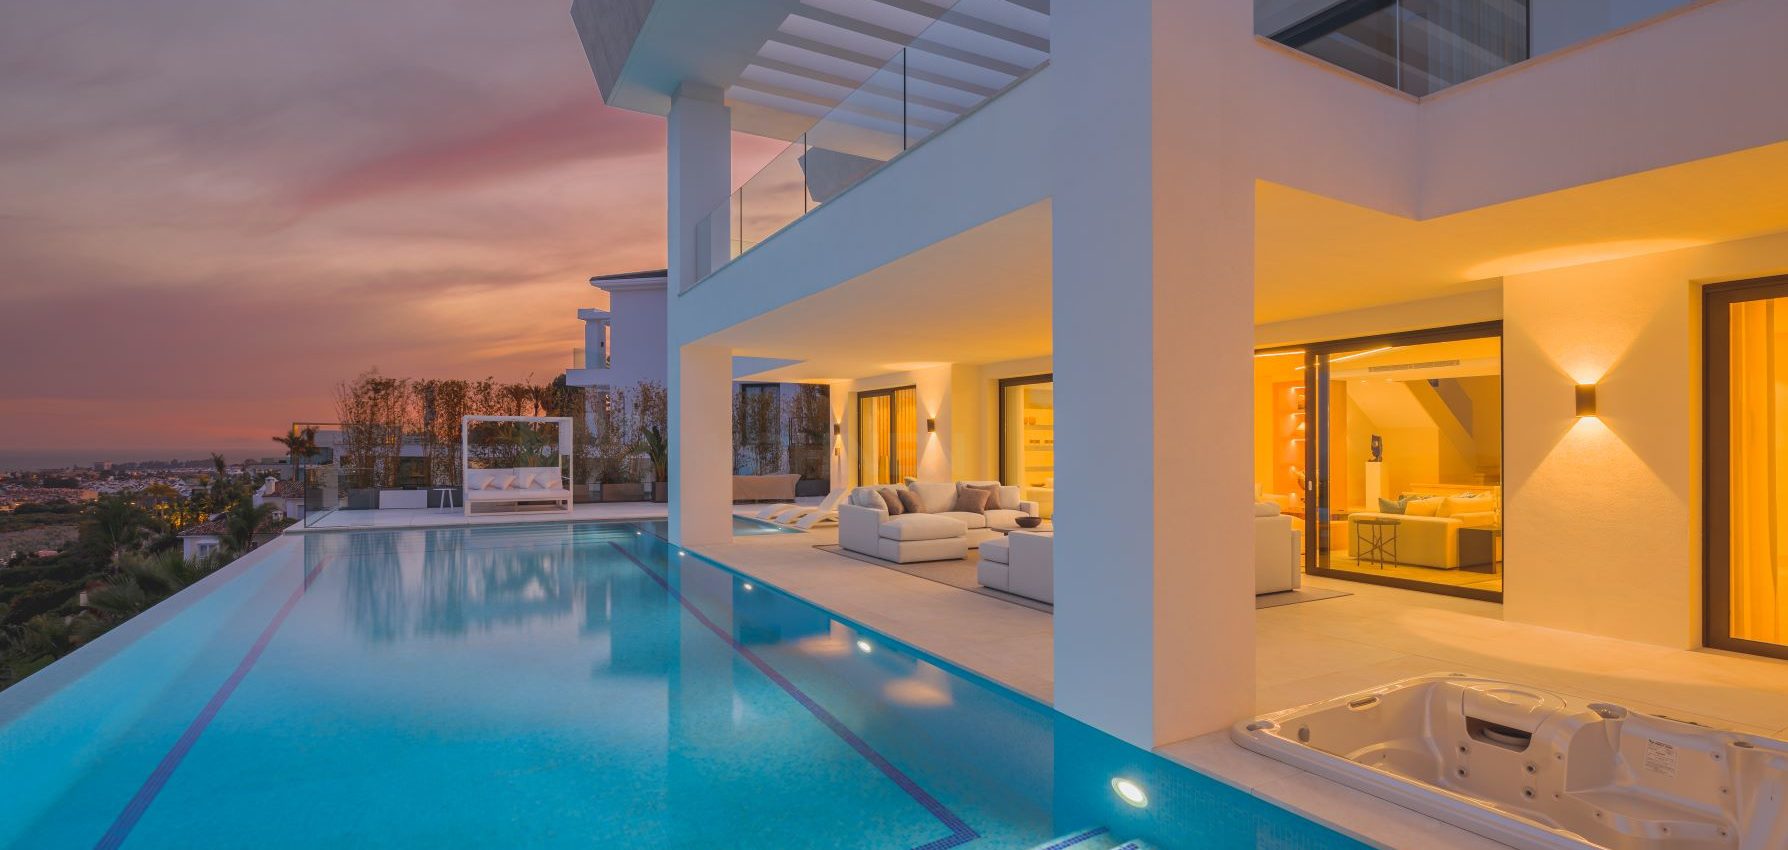 Stunning luxury villa with panoramic views over the Mediterranean coast and the golf course